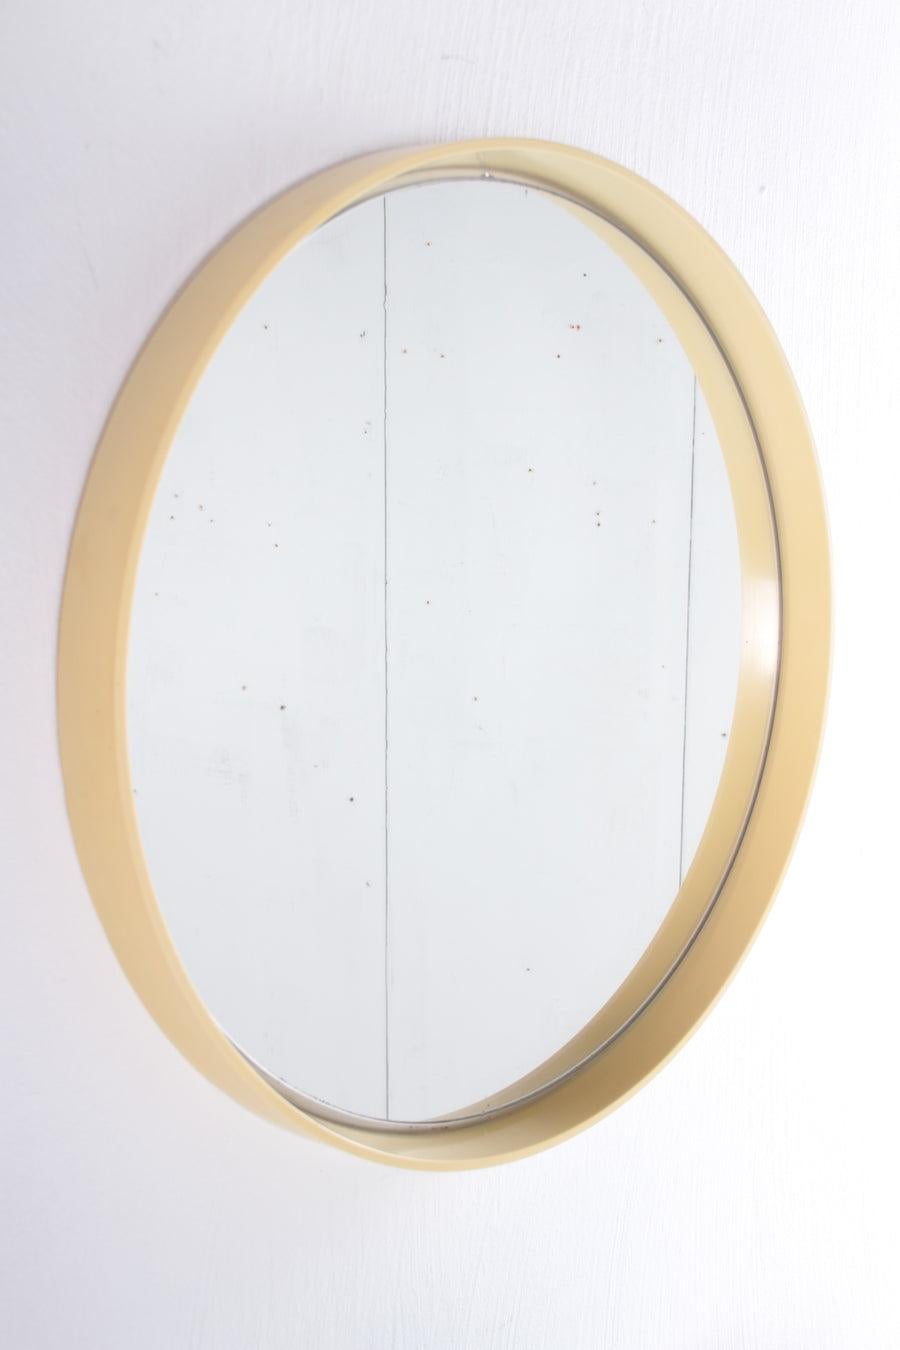 Round Creme Wall Mirror with Plastic Edge

Additional information: 
Dimensions: 53 W x 5 D x 53 H cm 
Period of Time: 1960
Country of origin: Germany
Condition: In normal condition